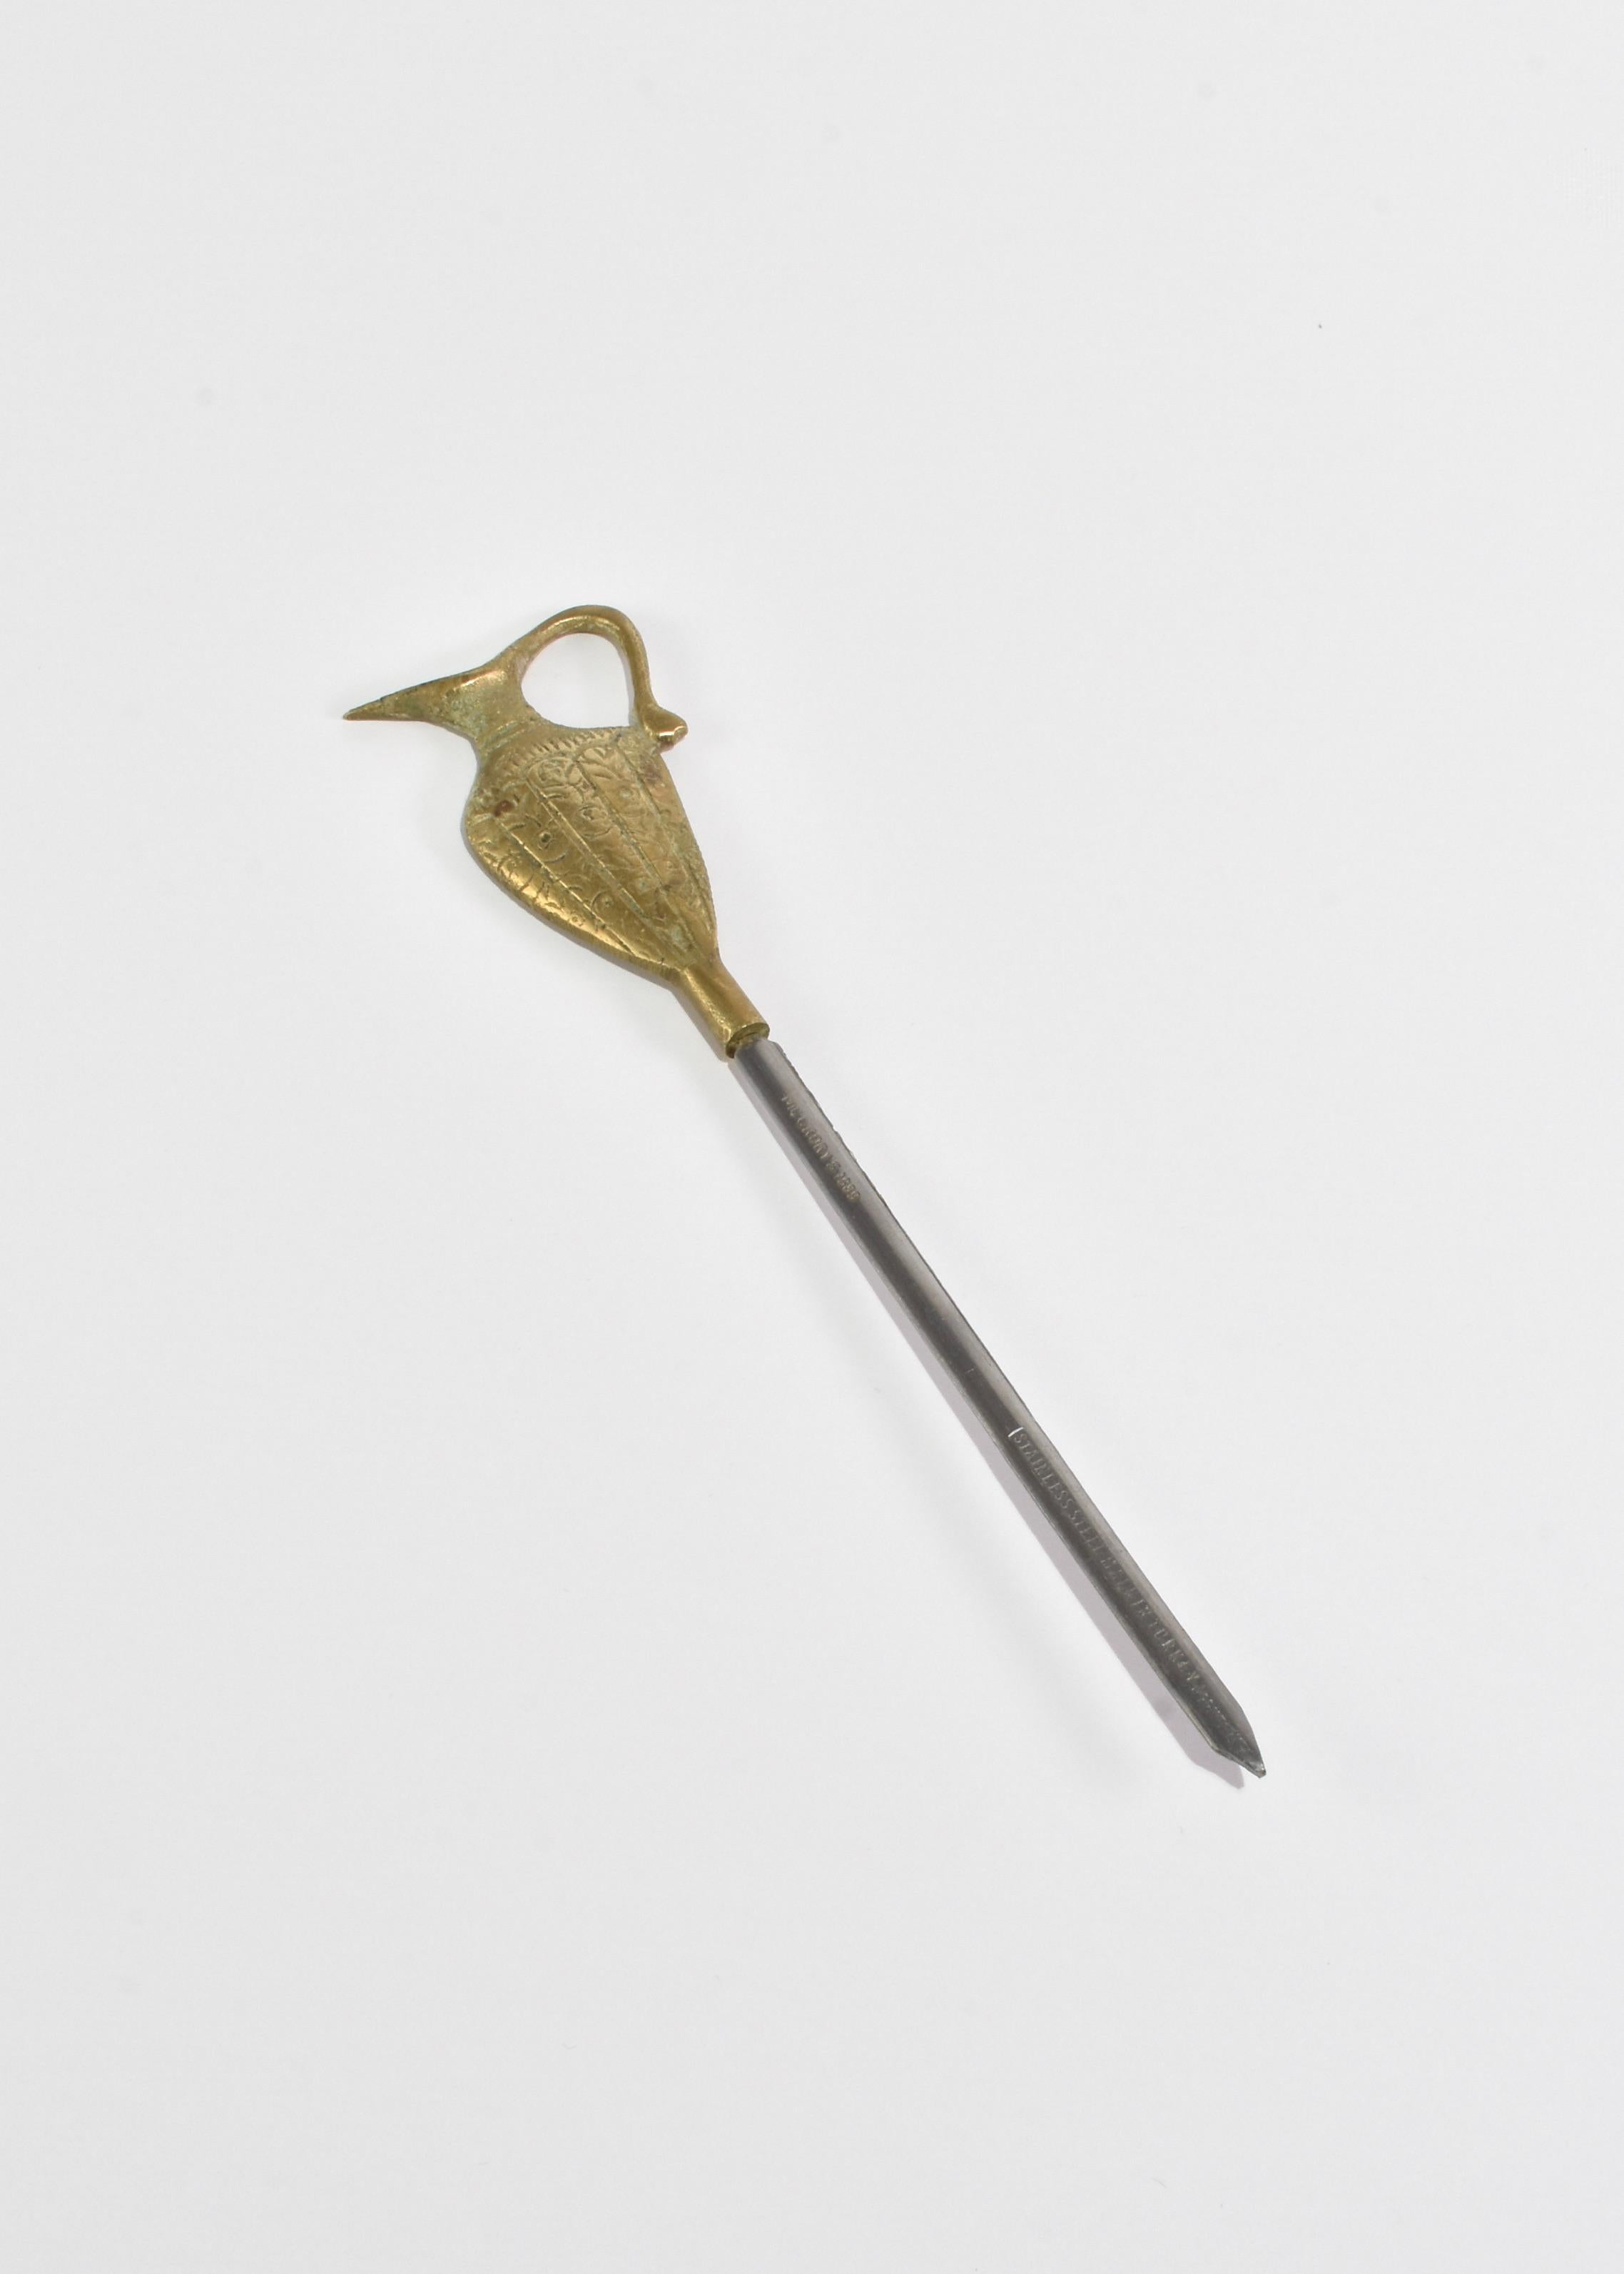 Vintage letter opener in stainless steel with a brass jug handle. Stamped McCrory's 1989, stainless steel, made in Turkey.